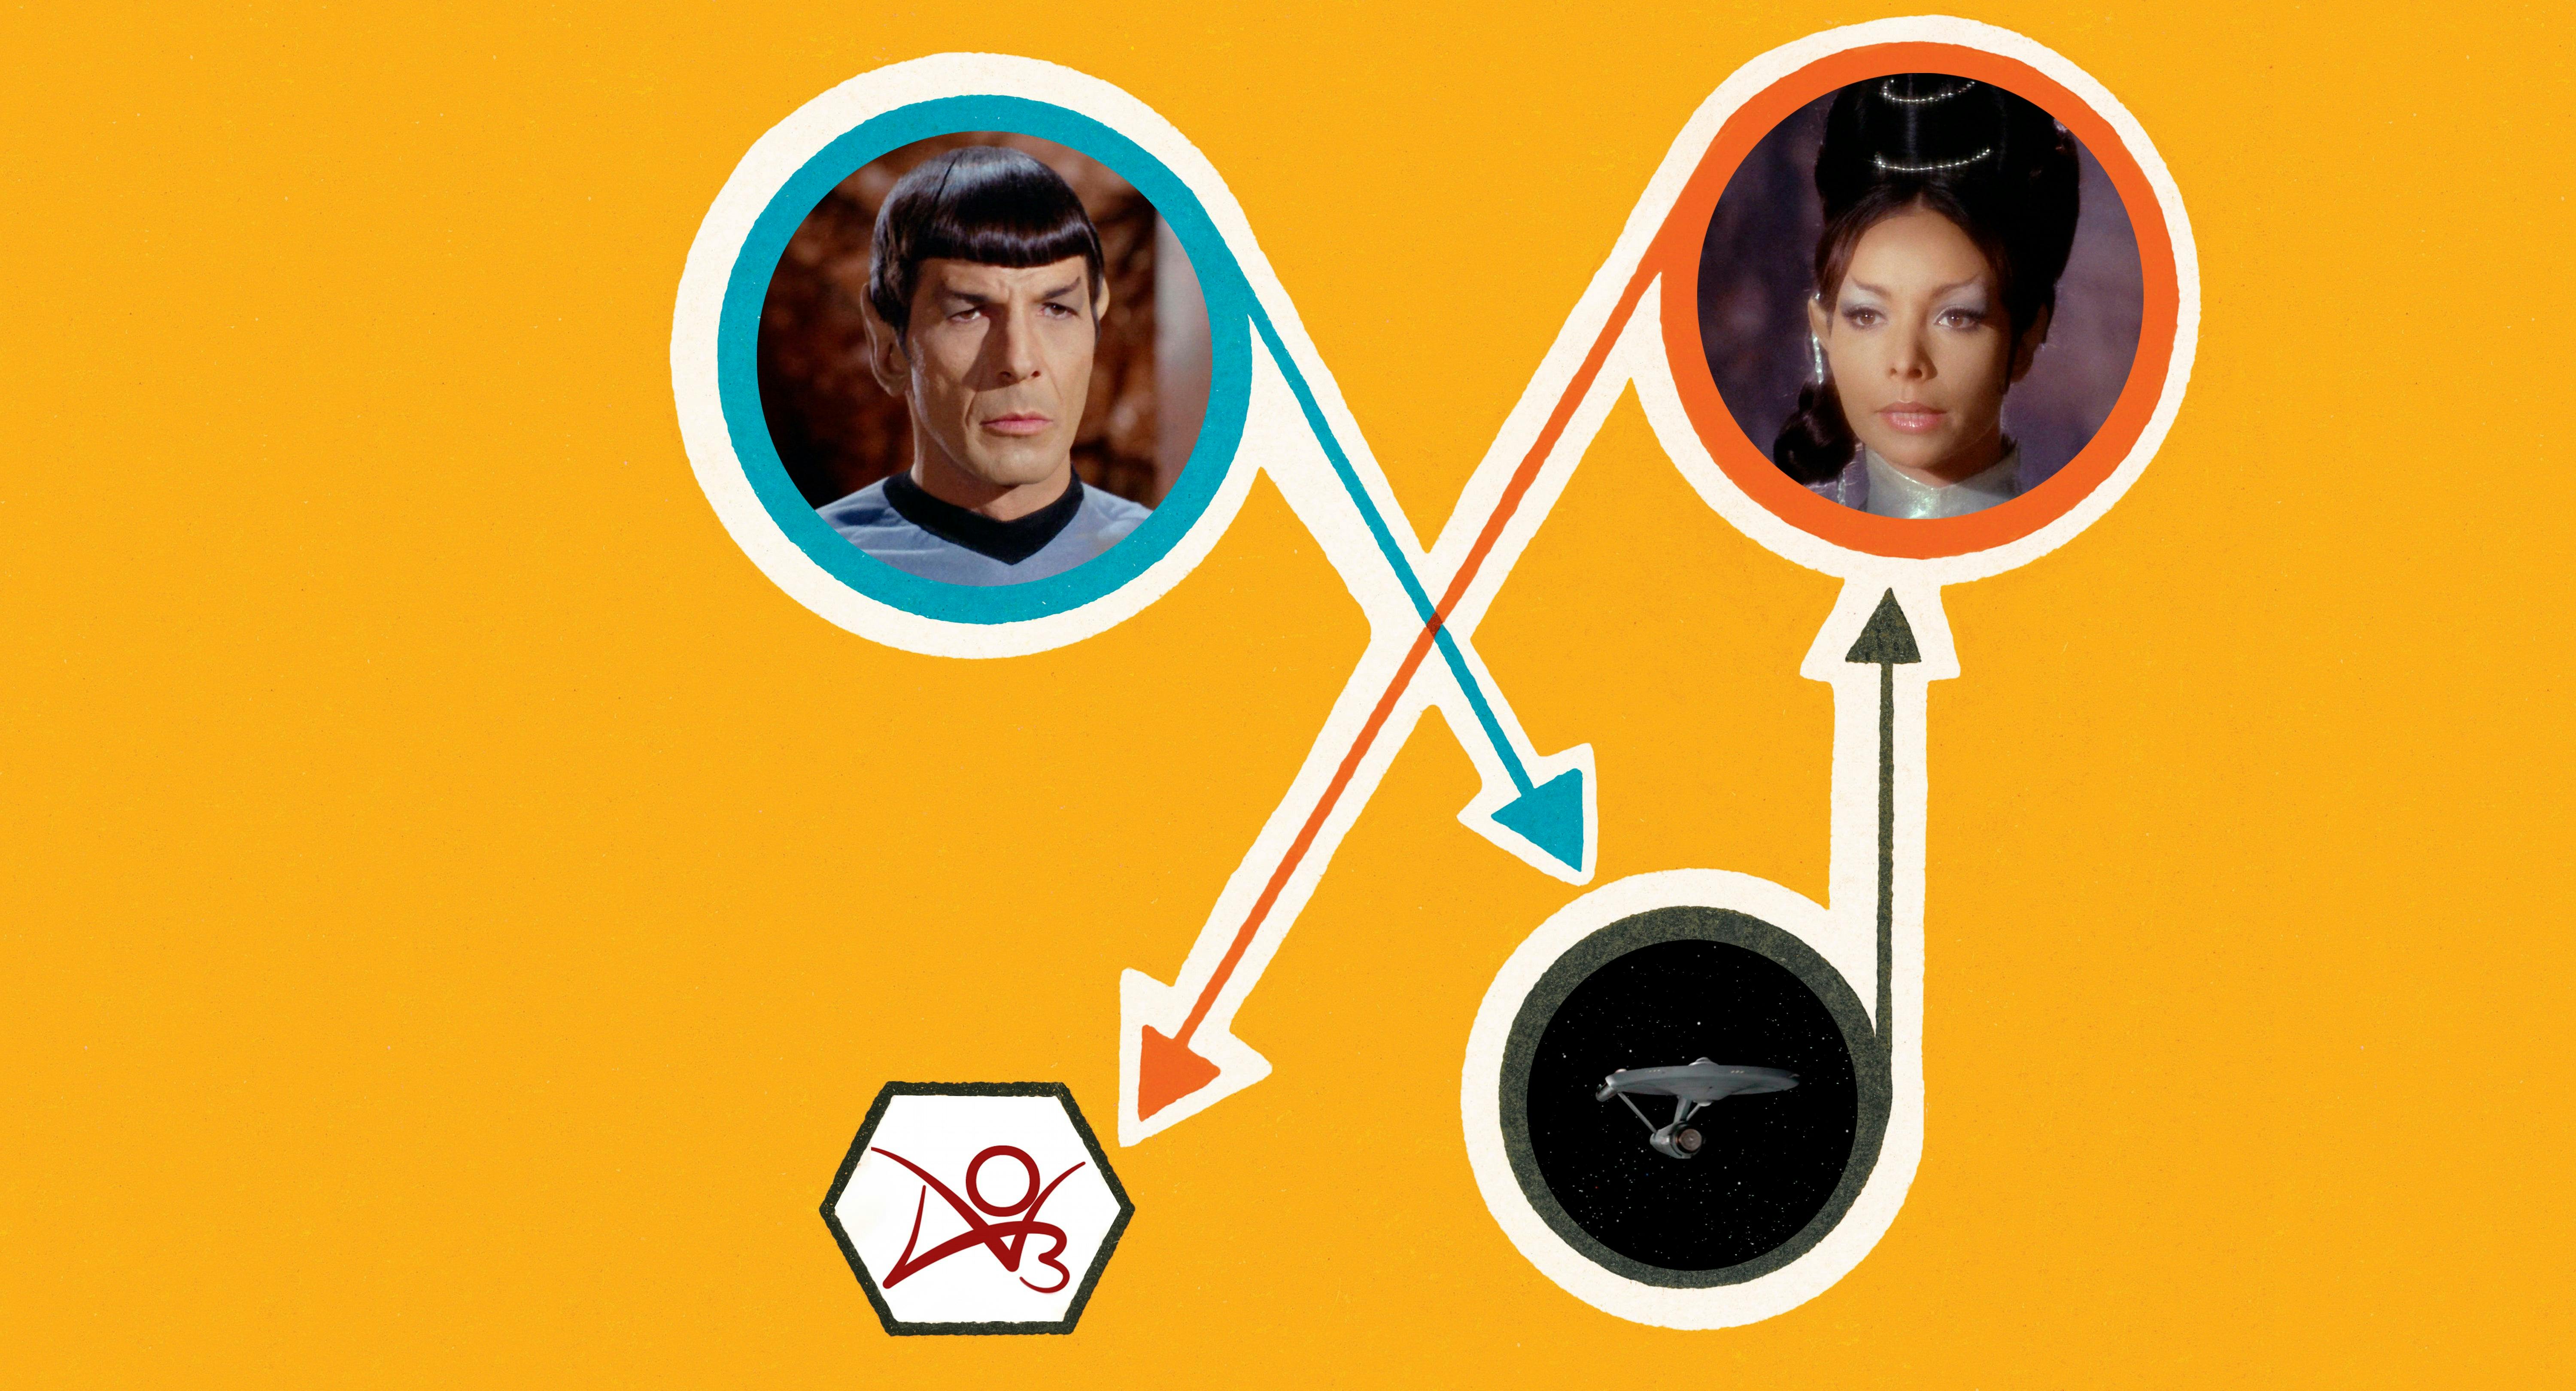 Header image featuring Spock and T'Pring